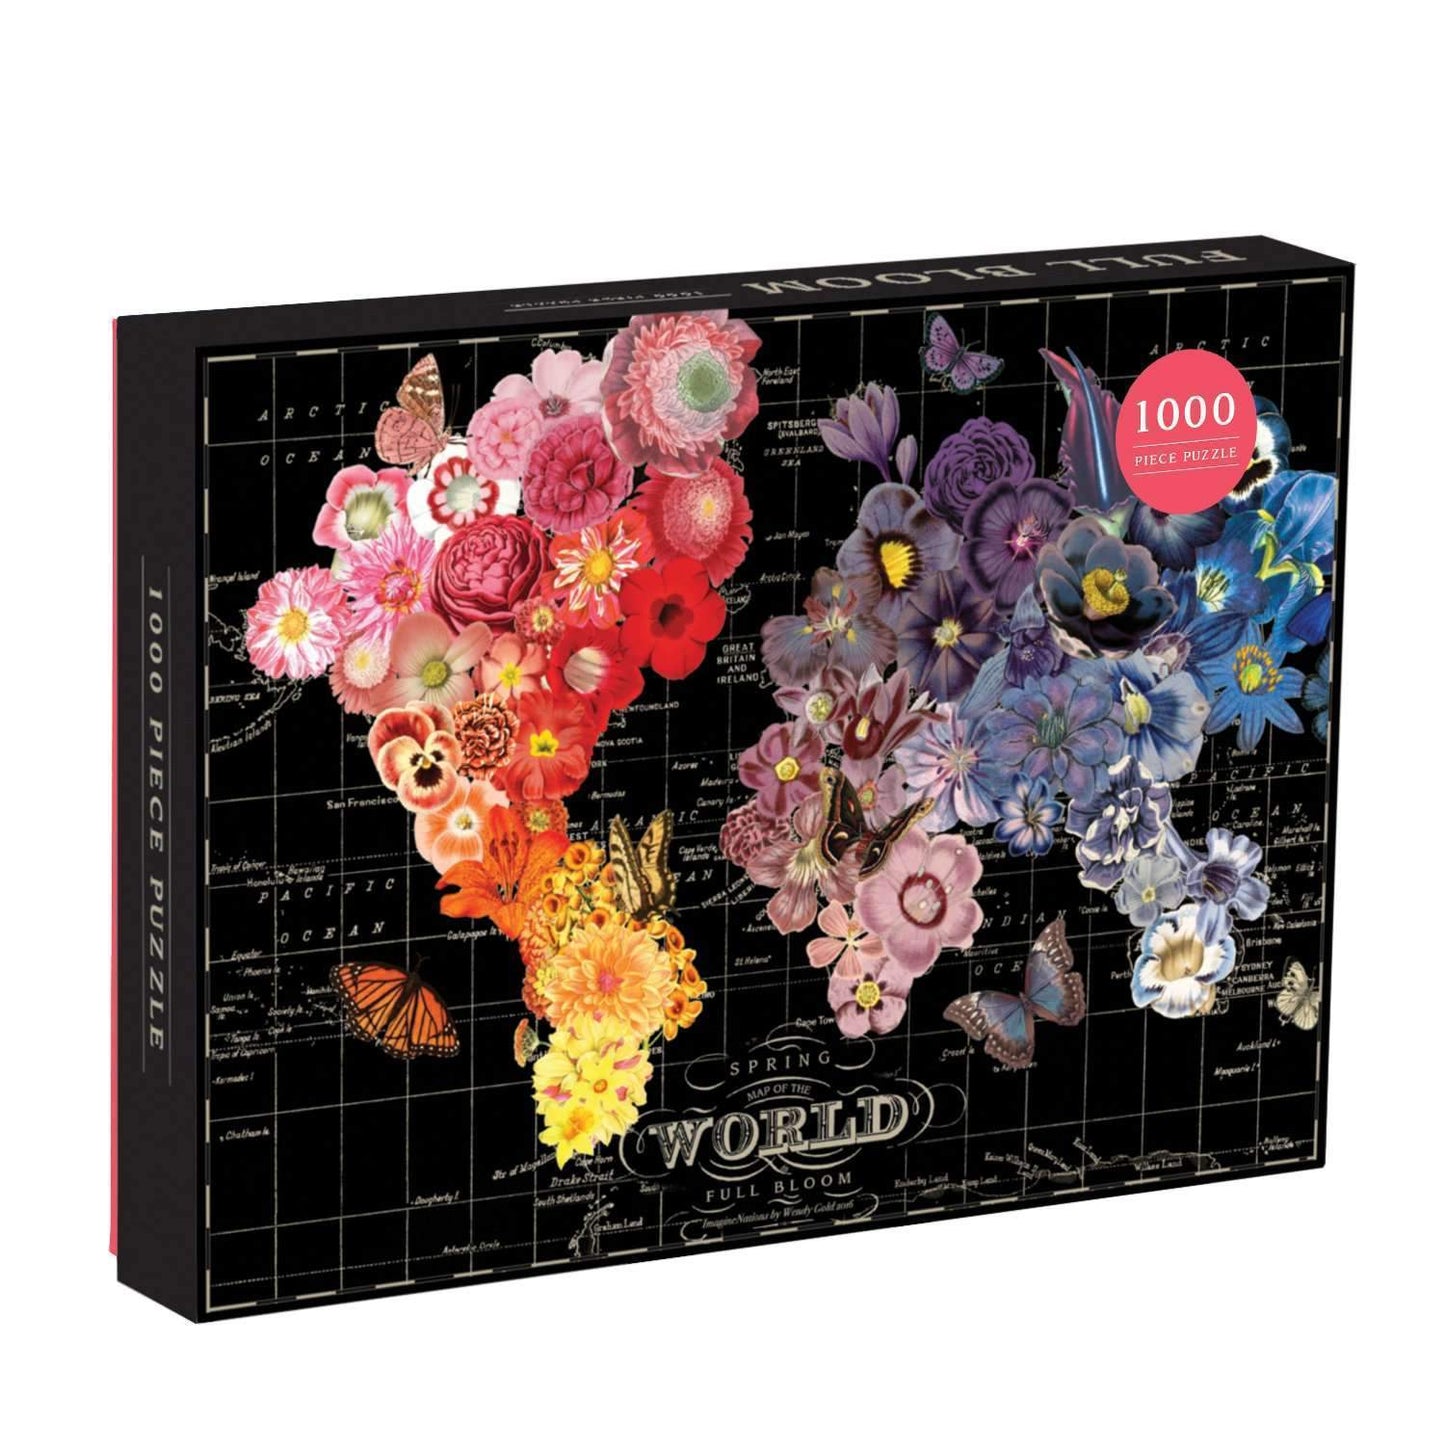 Wendy Gold Full Bloom - 1000 Piece Jigsaw Puzzle